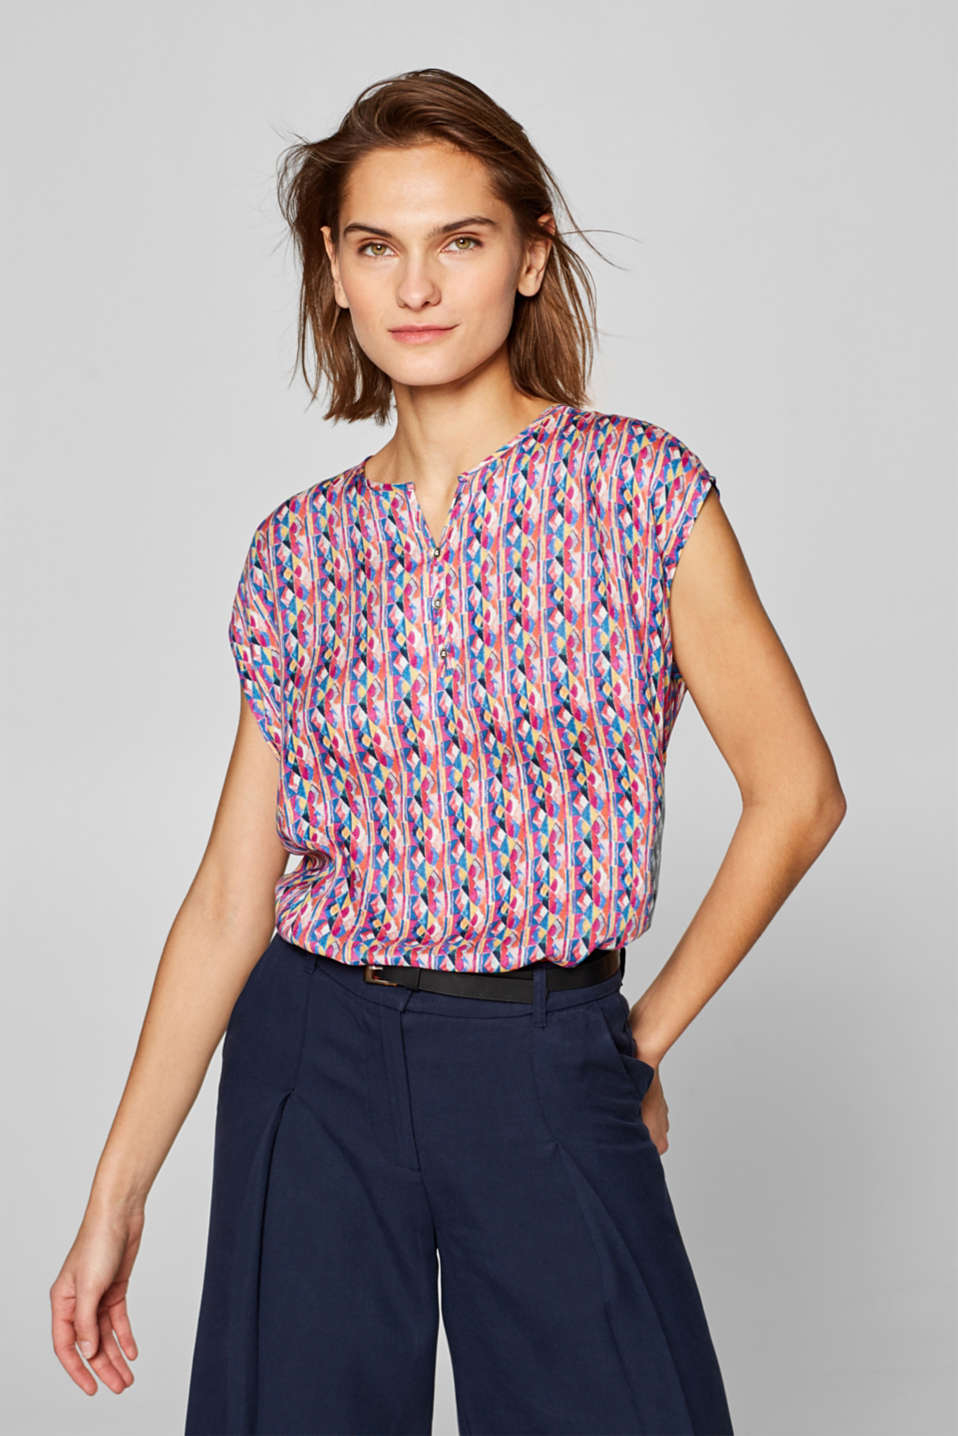 Esprit - Blouse top with a colourful mosaic print at our Online Shop